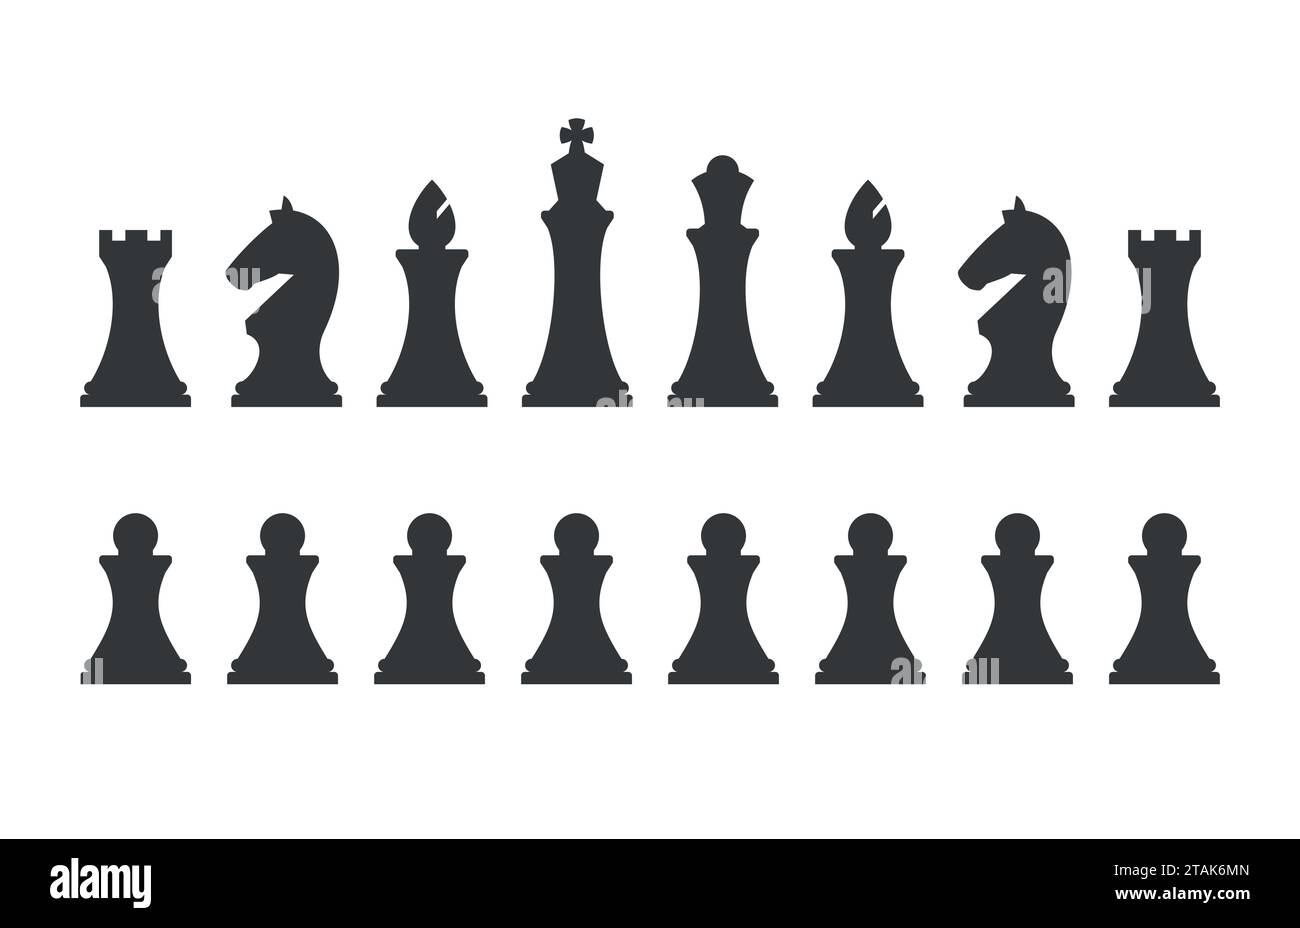 Set chess pieces isolated on white background. Chess pieces including the king, queen, bishop, knight, rook and pawn in flat style. Stock Vector